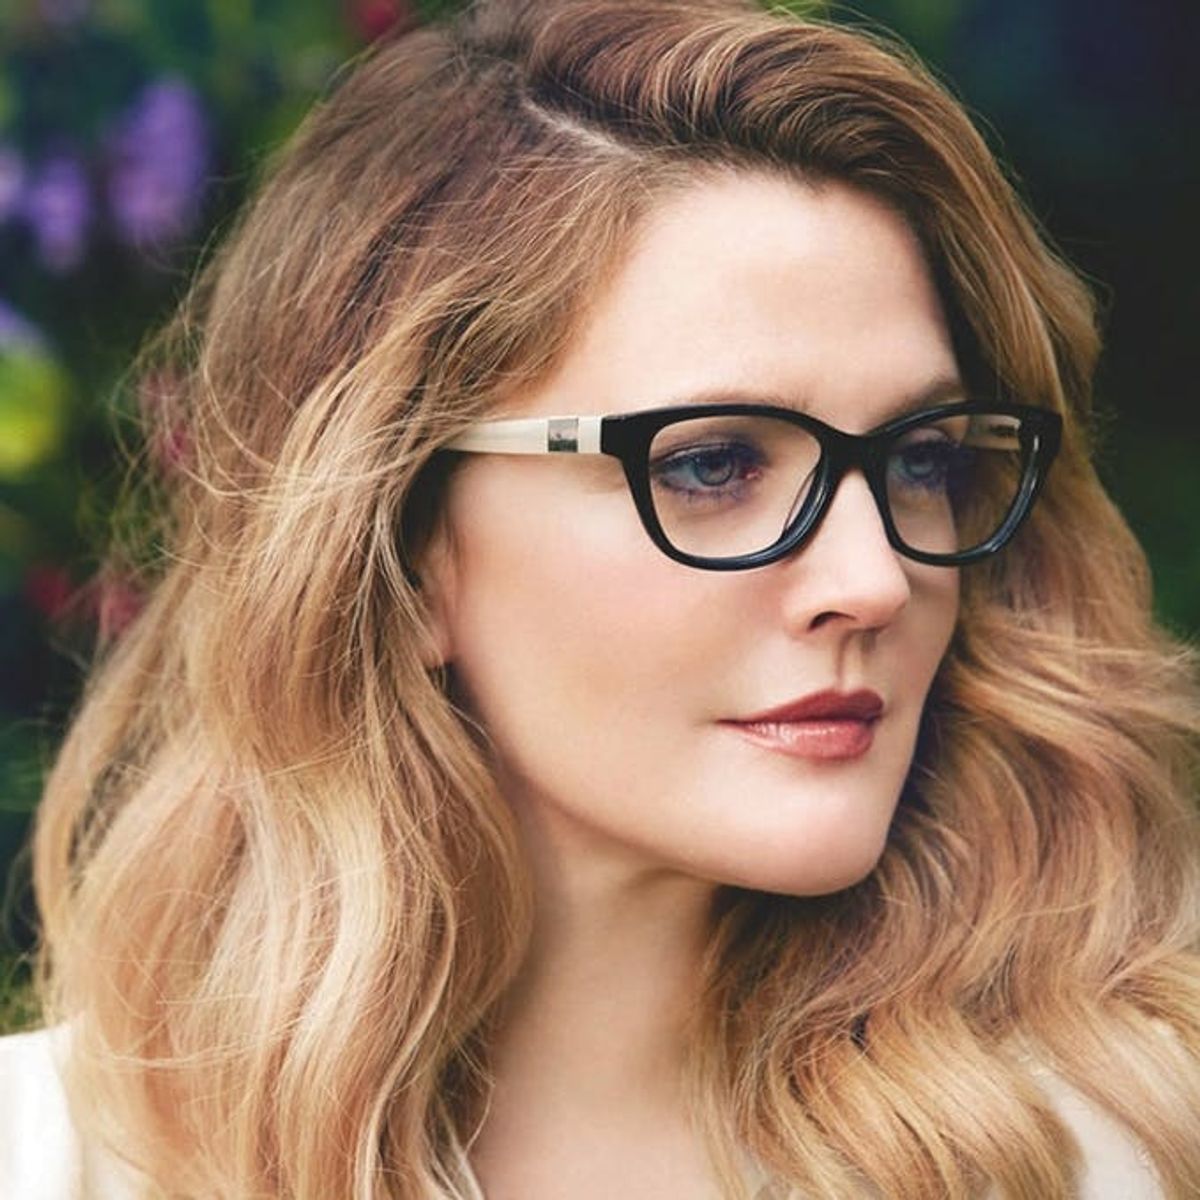 Drew Barrymore Just Launched a Gorgeous Eyewear Line